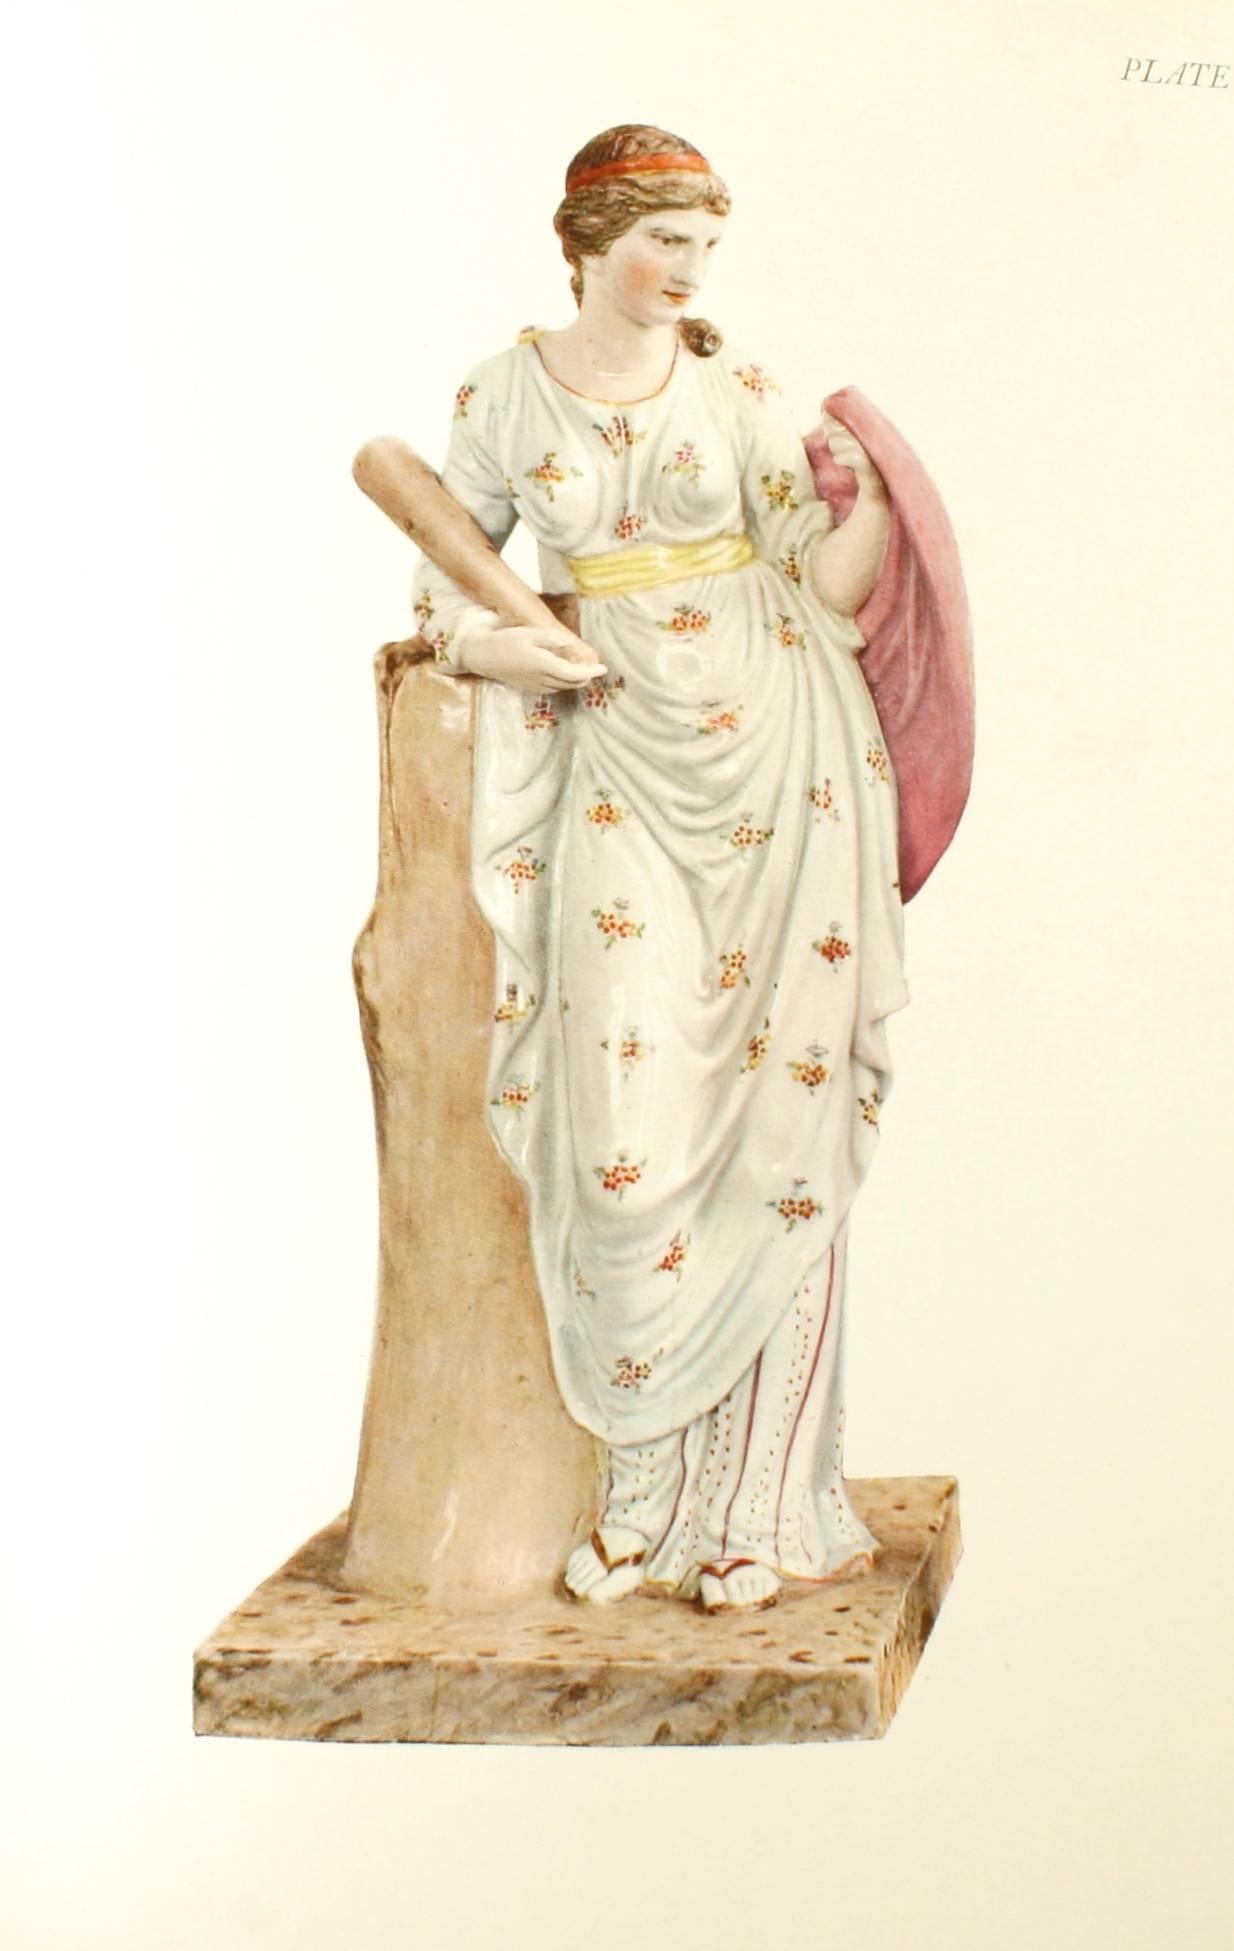 18th Century English Porcelain Figures by William King, 1st Ed In Good Condition For Sale In valatie, NY